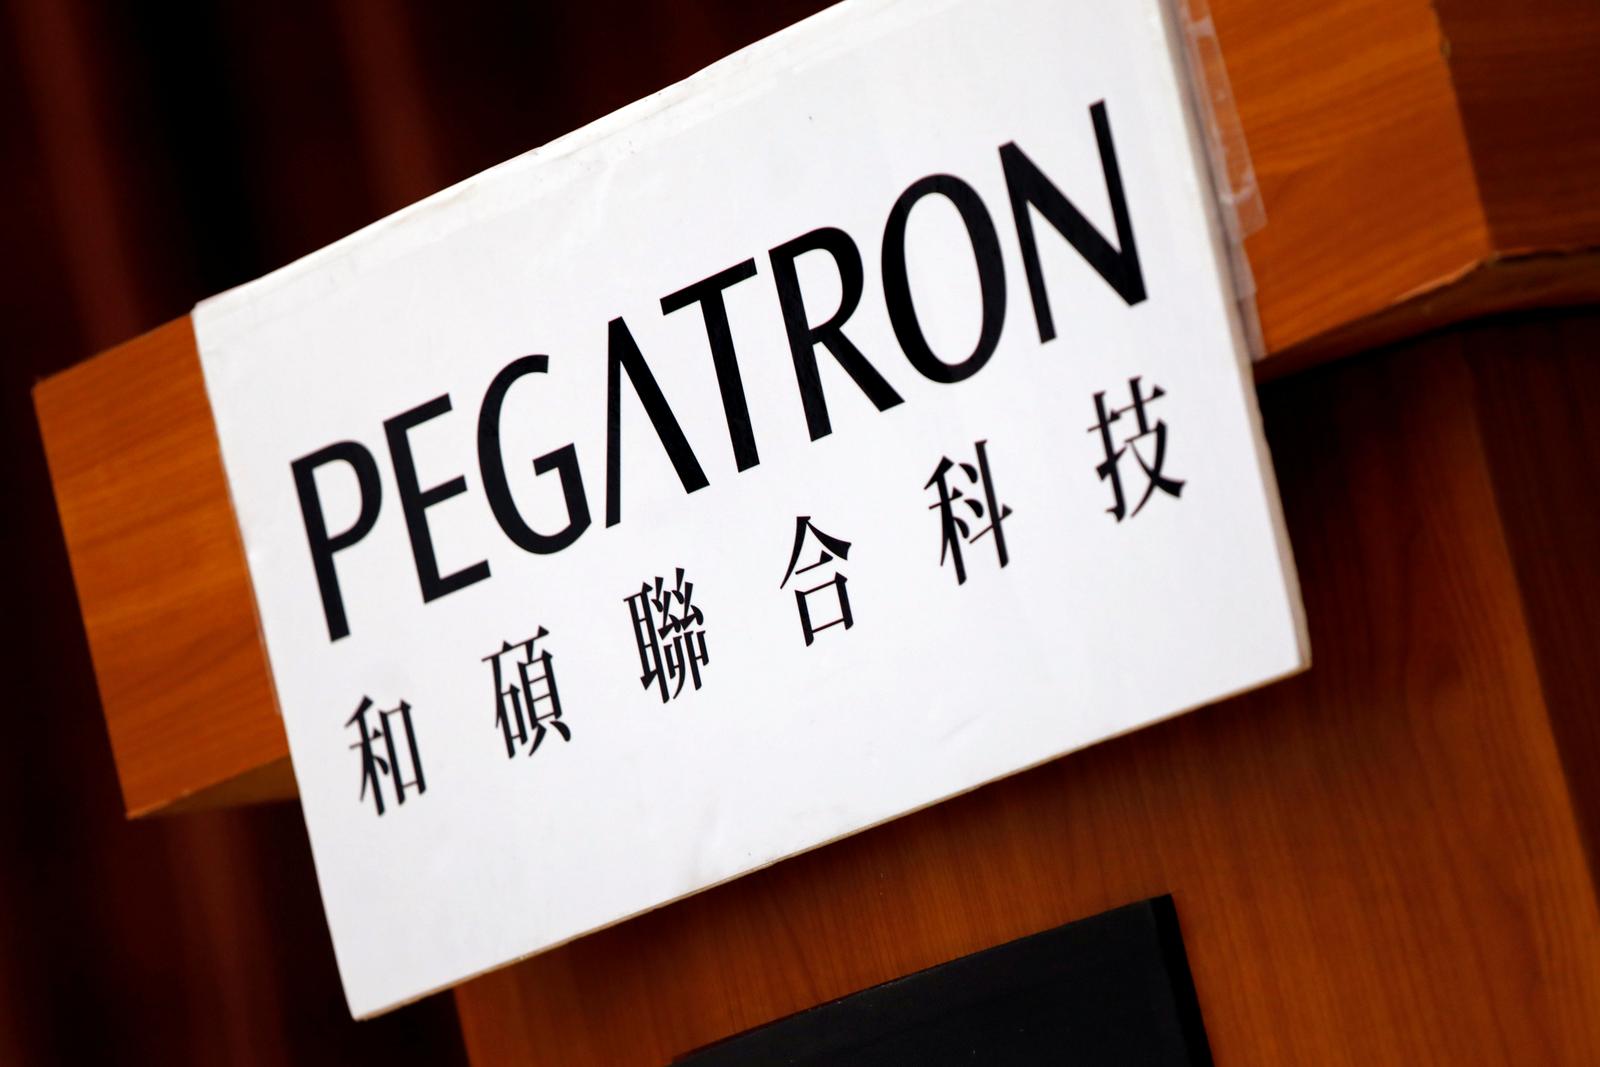 Taiwan approves $101 mln Pegatron investment in Vietnam